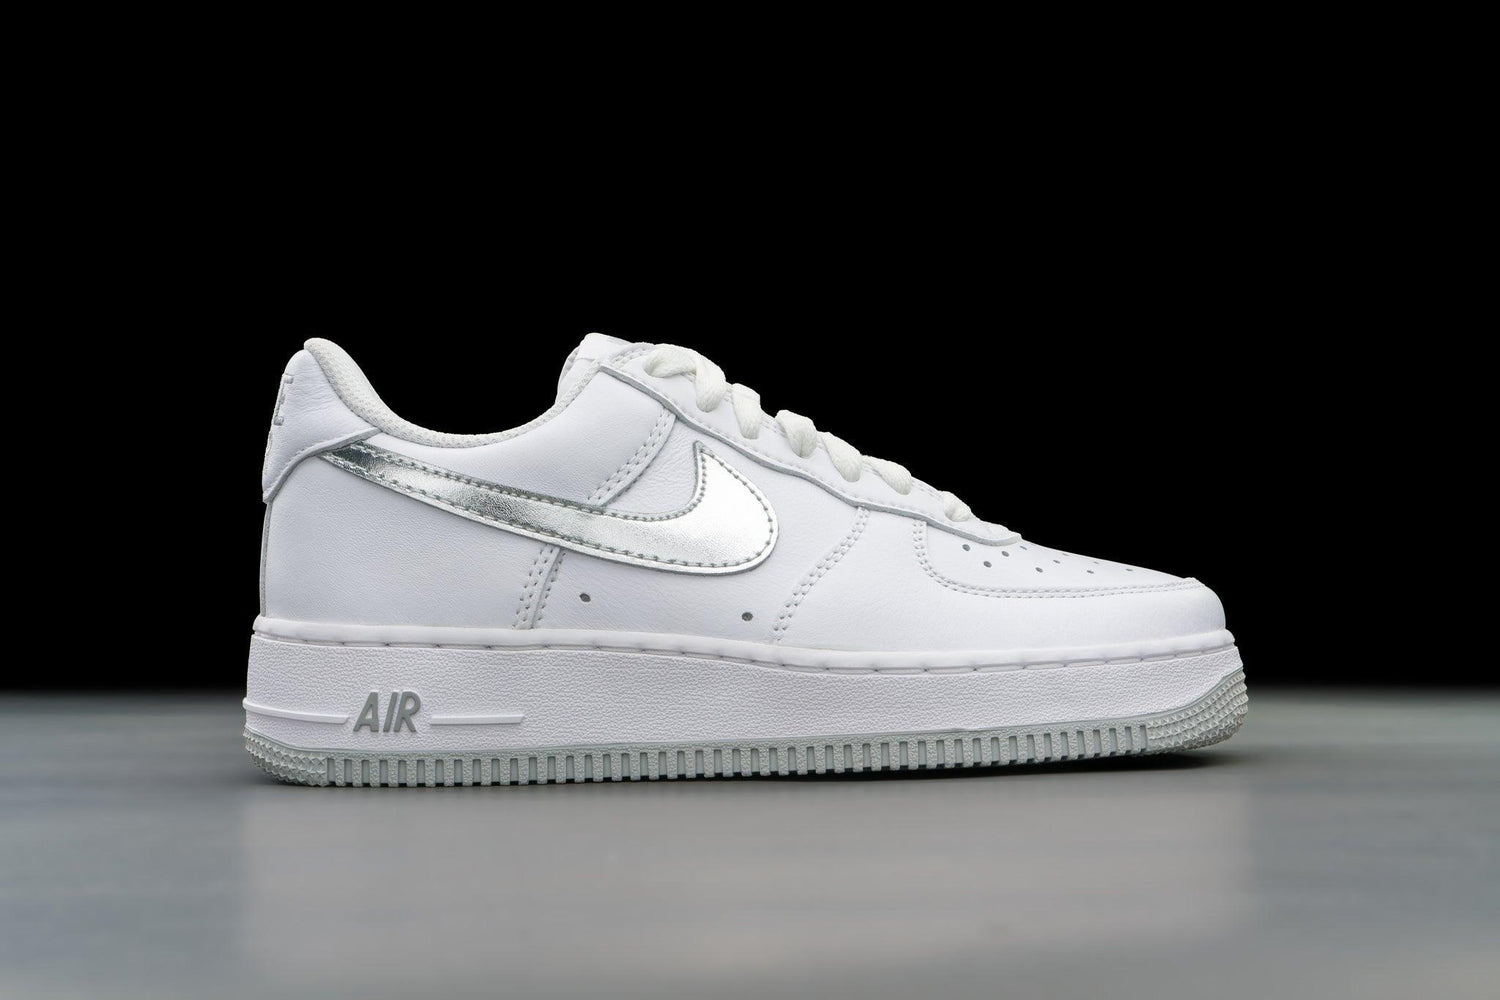 Nike Air Force 1 '07 Low Color of the Month White Metallic Silver - Lo10M